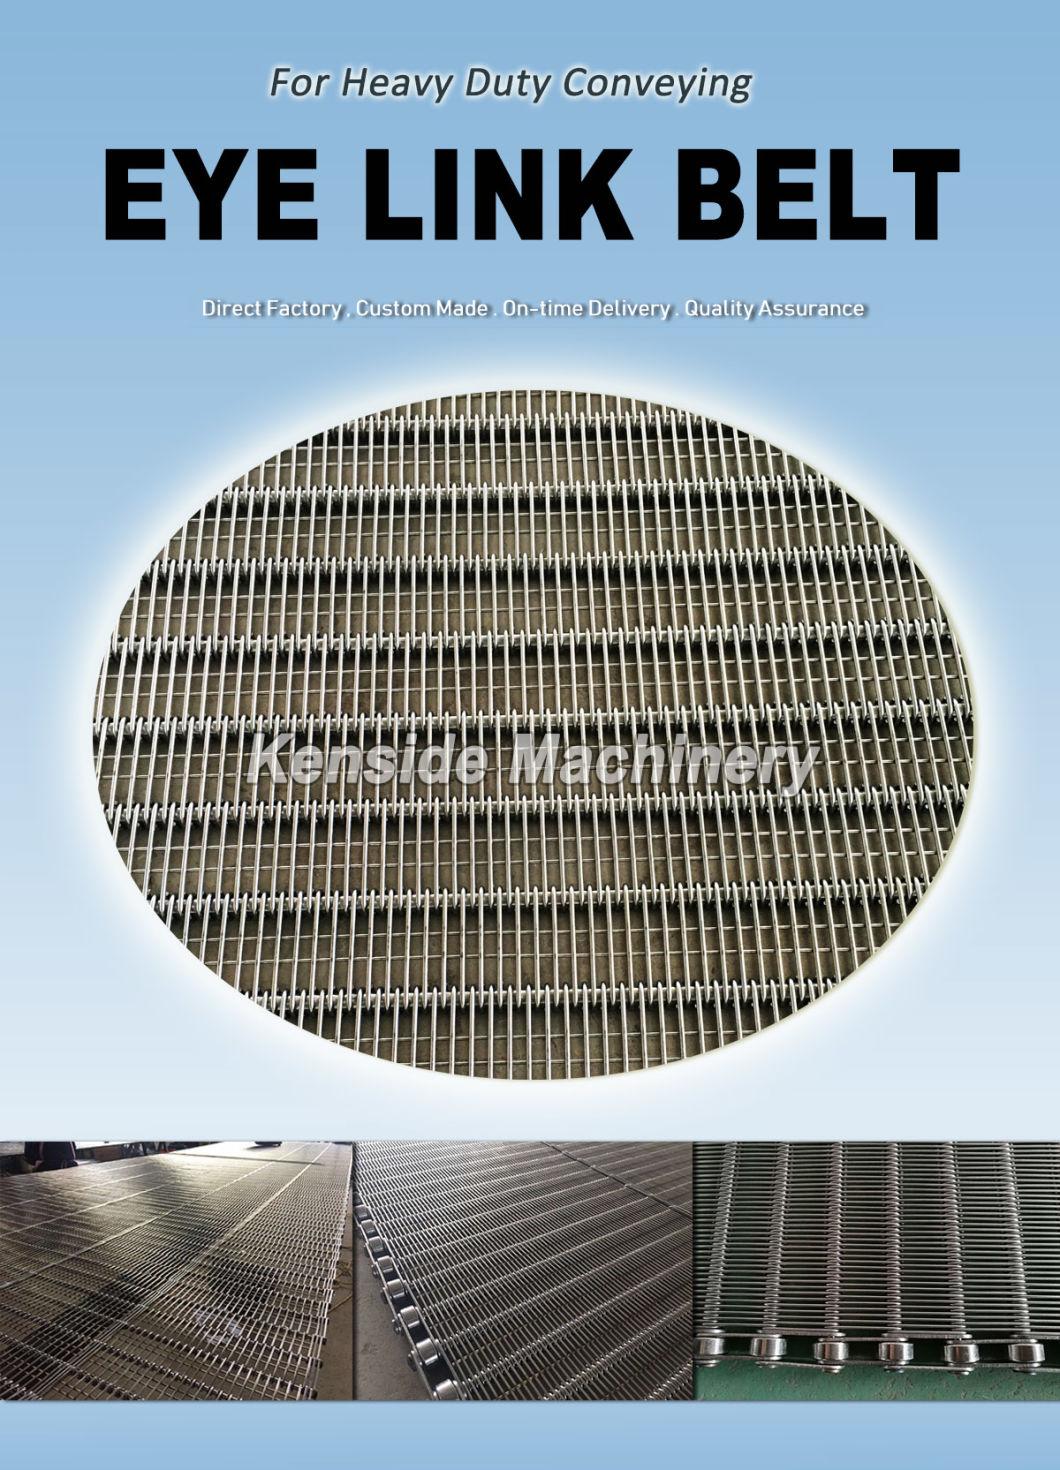 Stainless Steel Eye Link Belt for Conveying Fragile Products